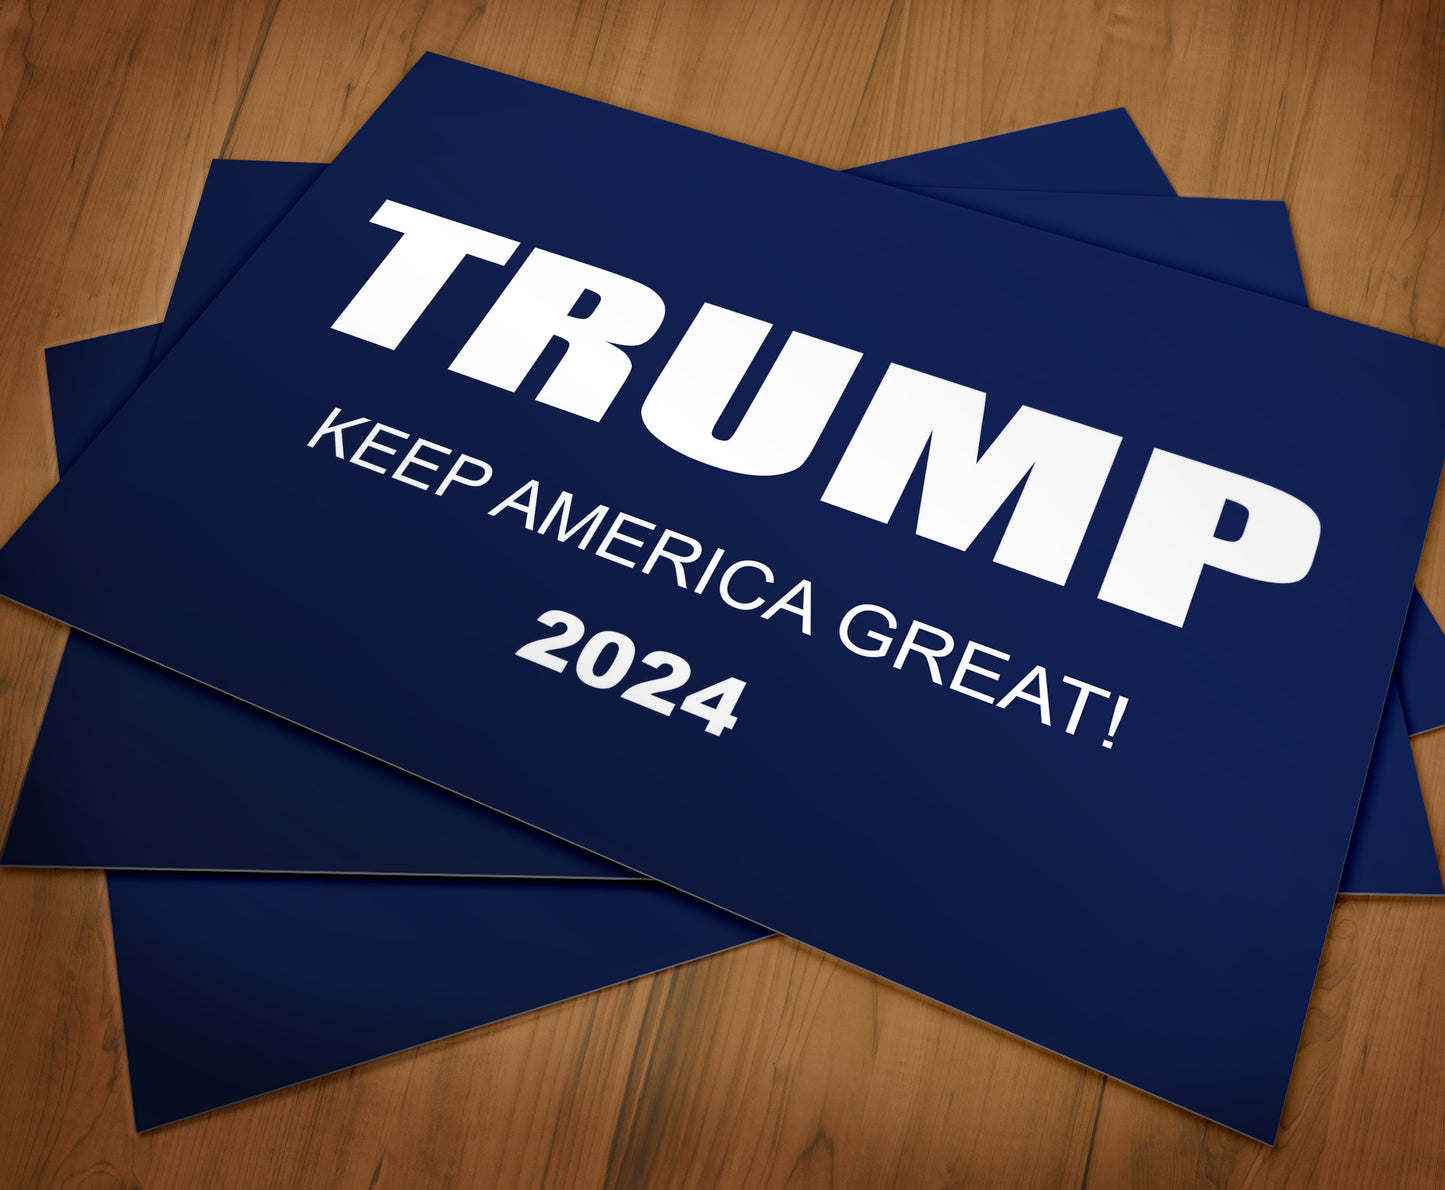 show your support with this Trump Sign.  Keep America Great!